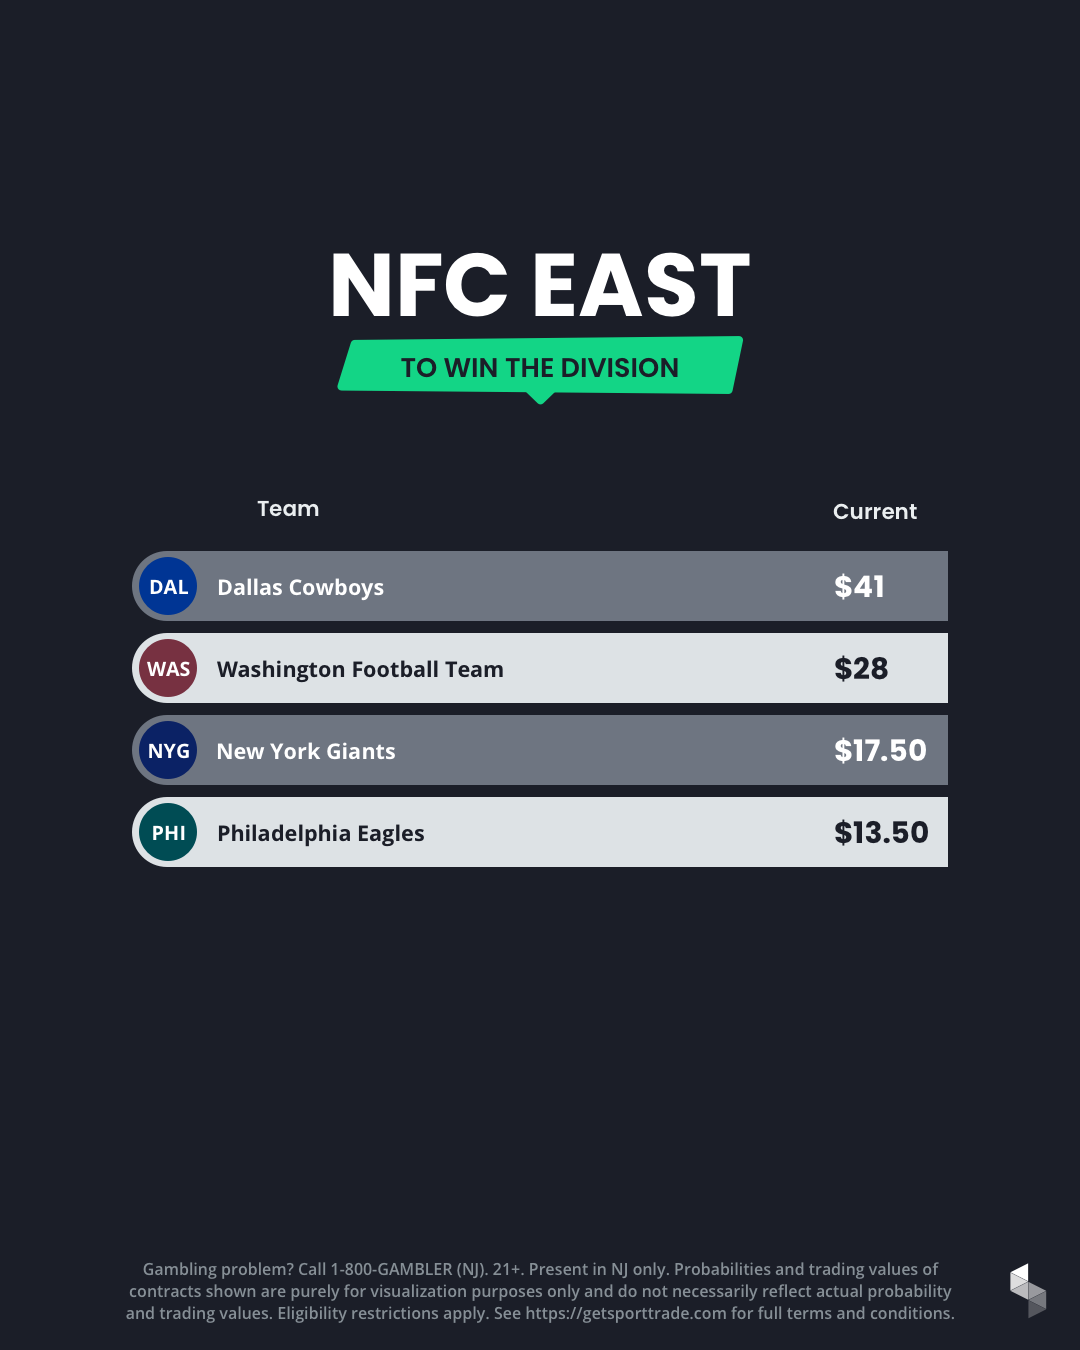 NFC Futures as of August 16, 2021